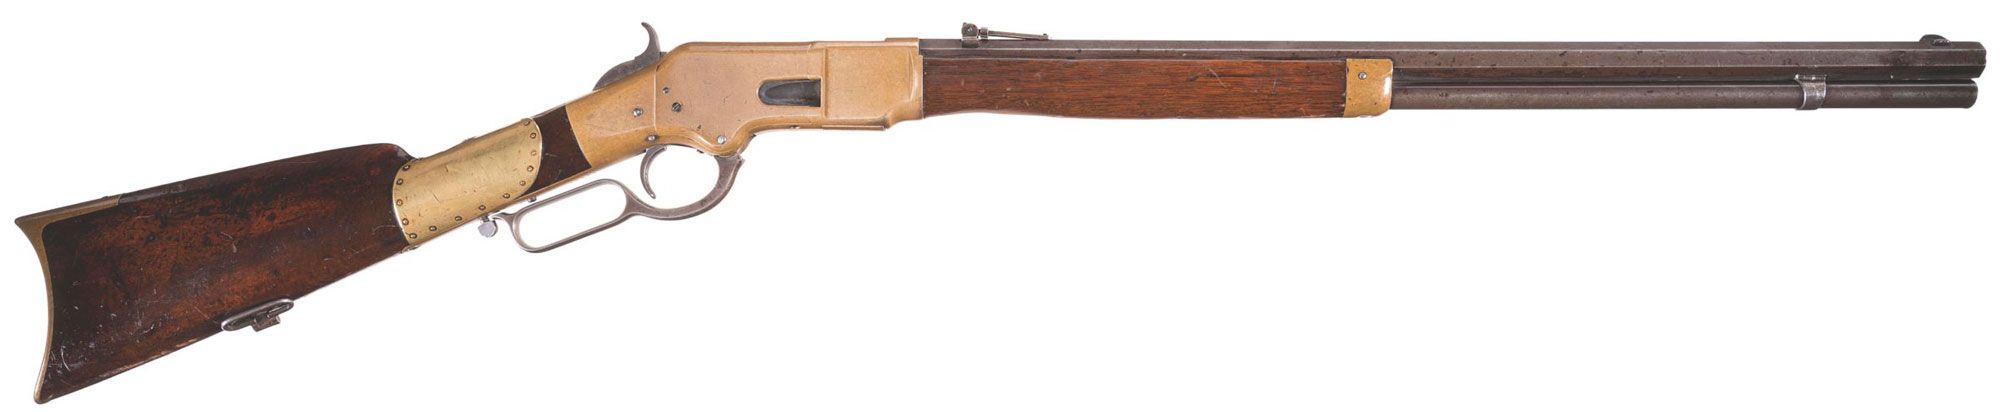 Lot 2026: Winchester Model 1866 Lever Action Rifle